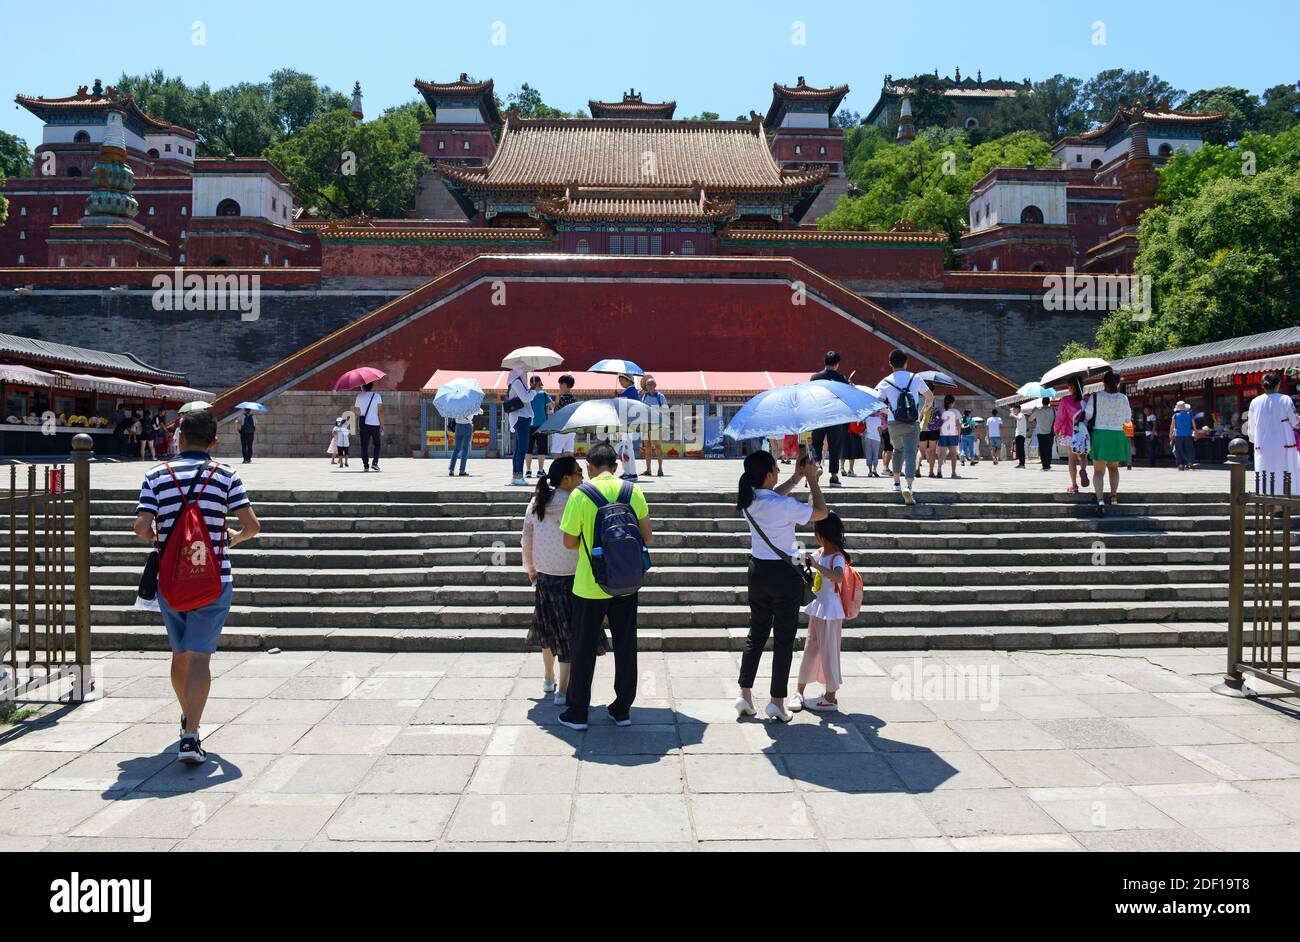 Scenes on the back hill in front of Chenghuai pavilion on the hill at the Summer Palace in Beijing, China Stock Photo